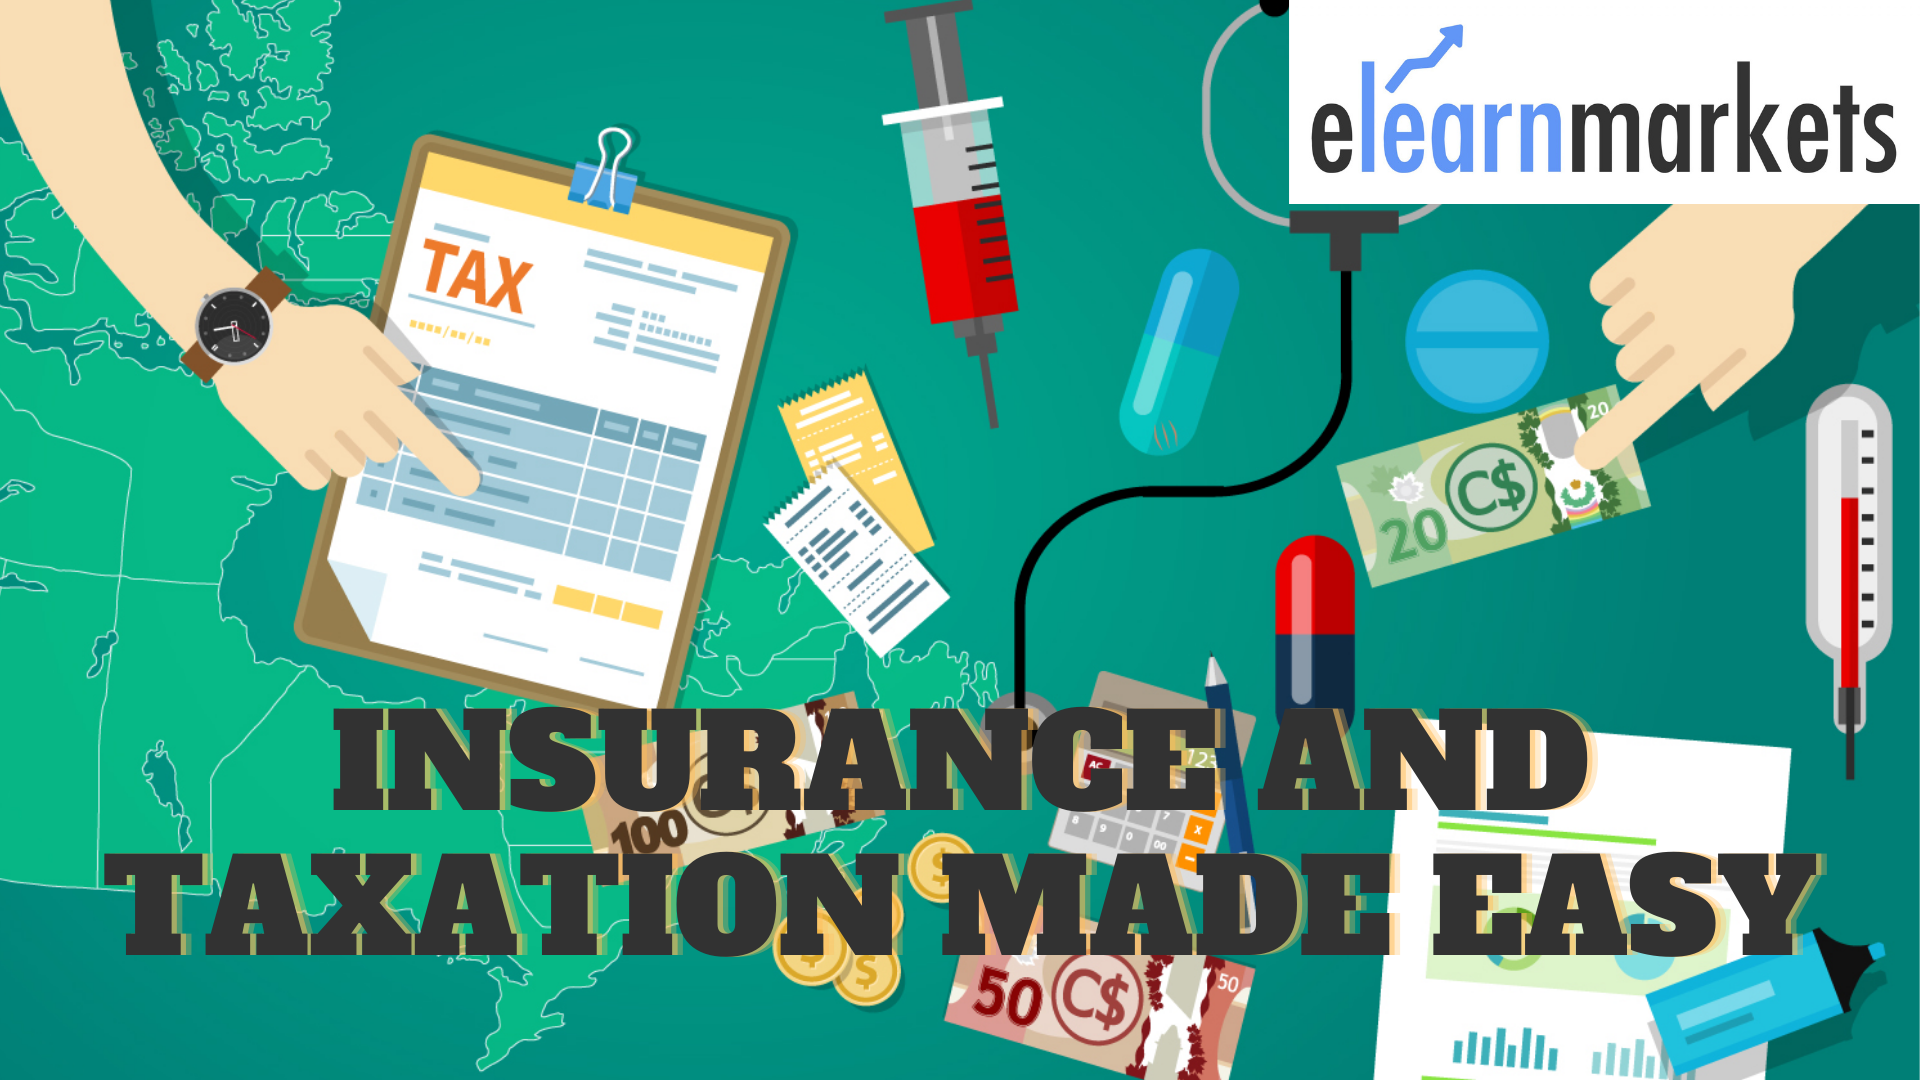 Insurance and Taxation Made Easy